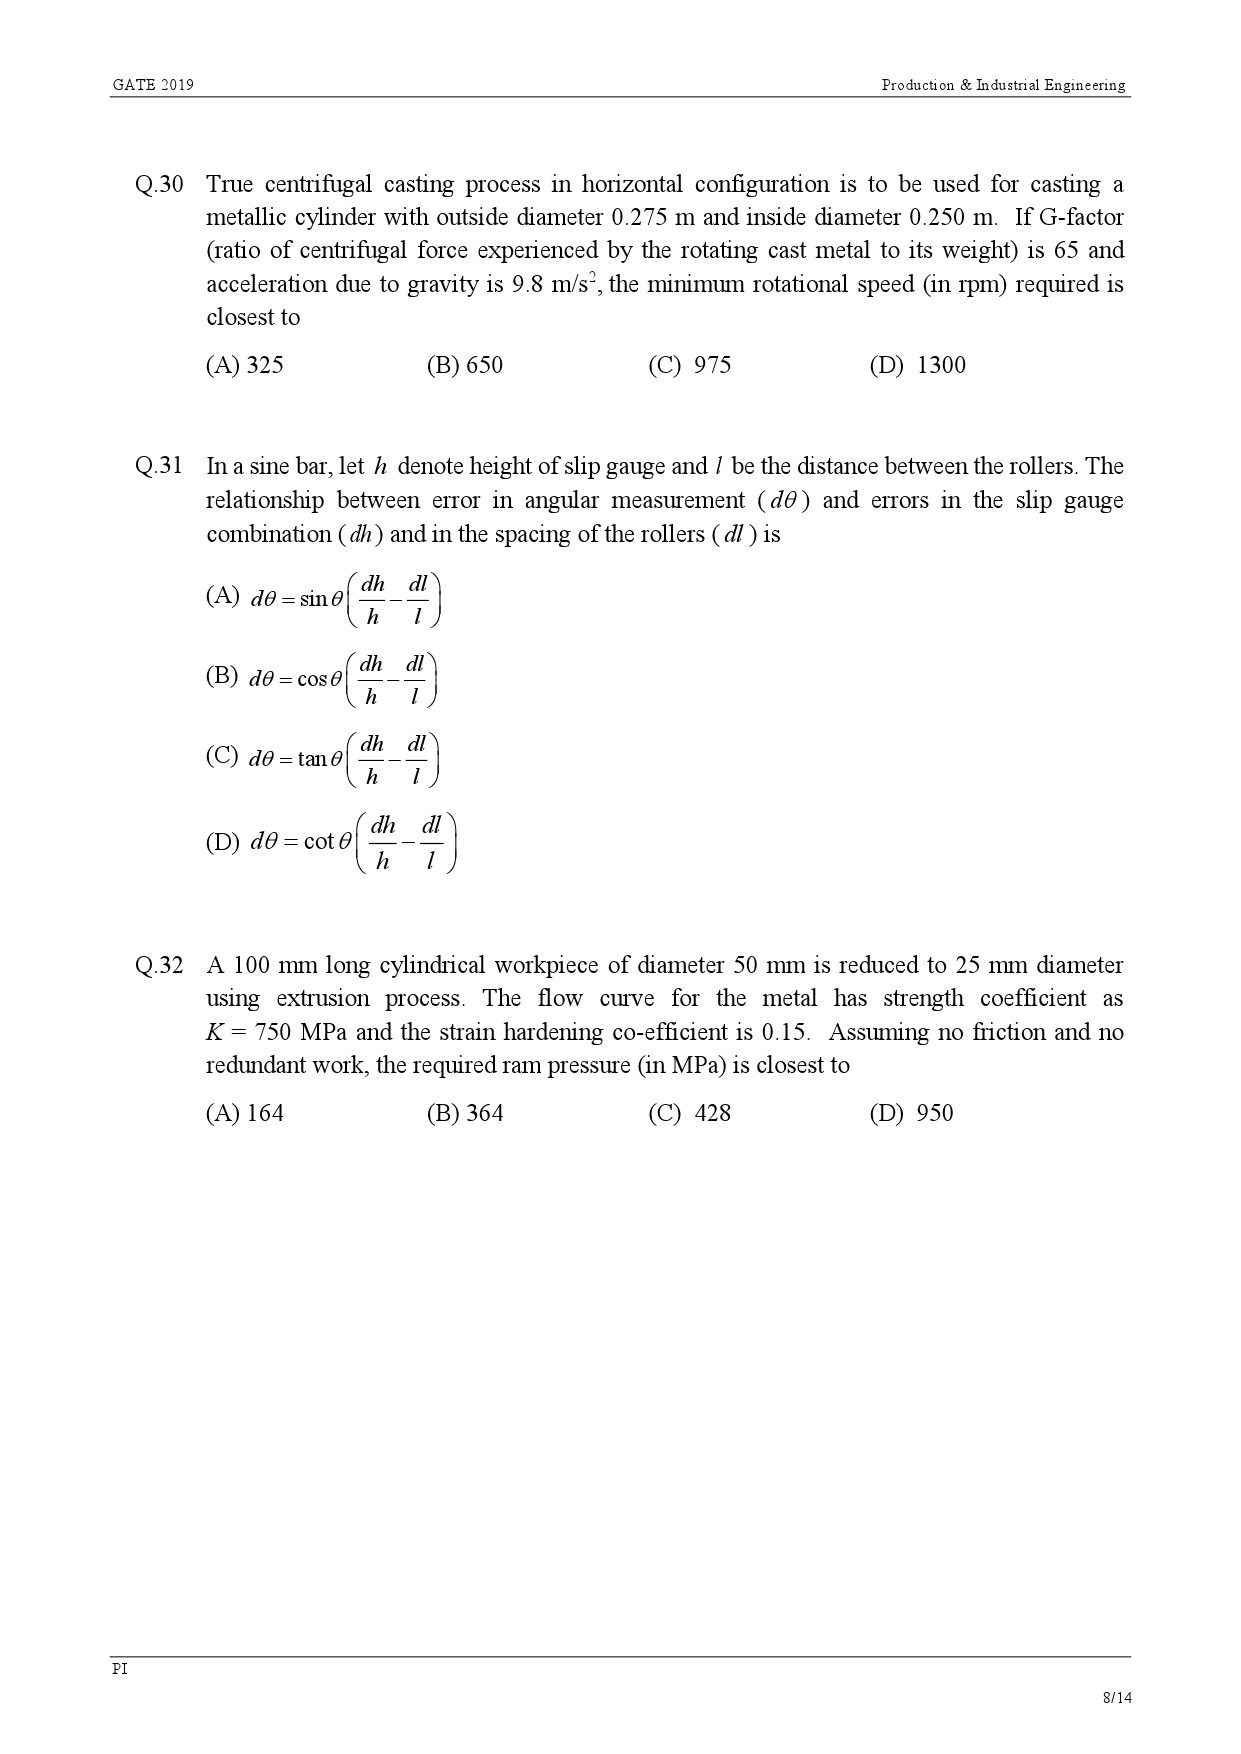 GATE Exam Question Paper 2019 Production and Industrial Engineering 11